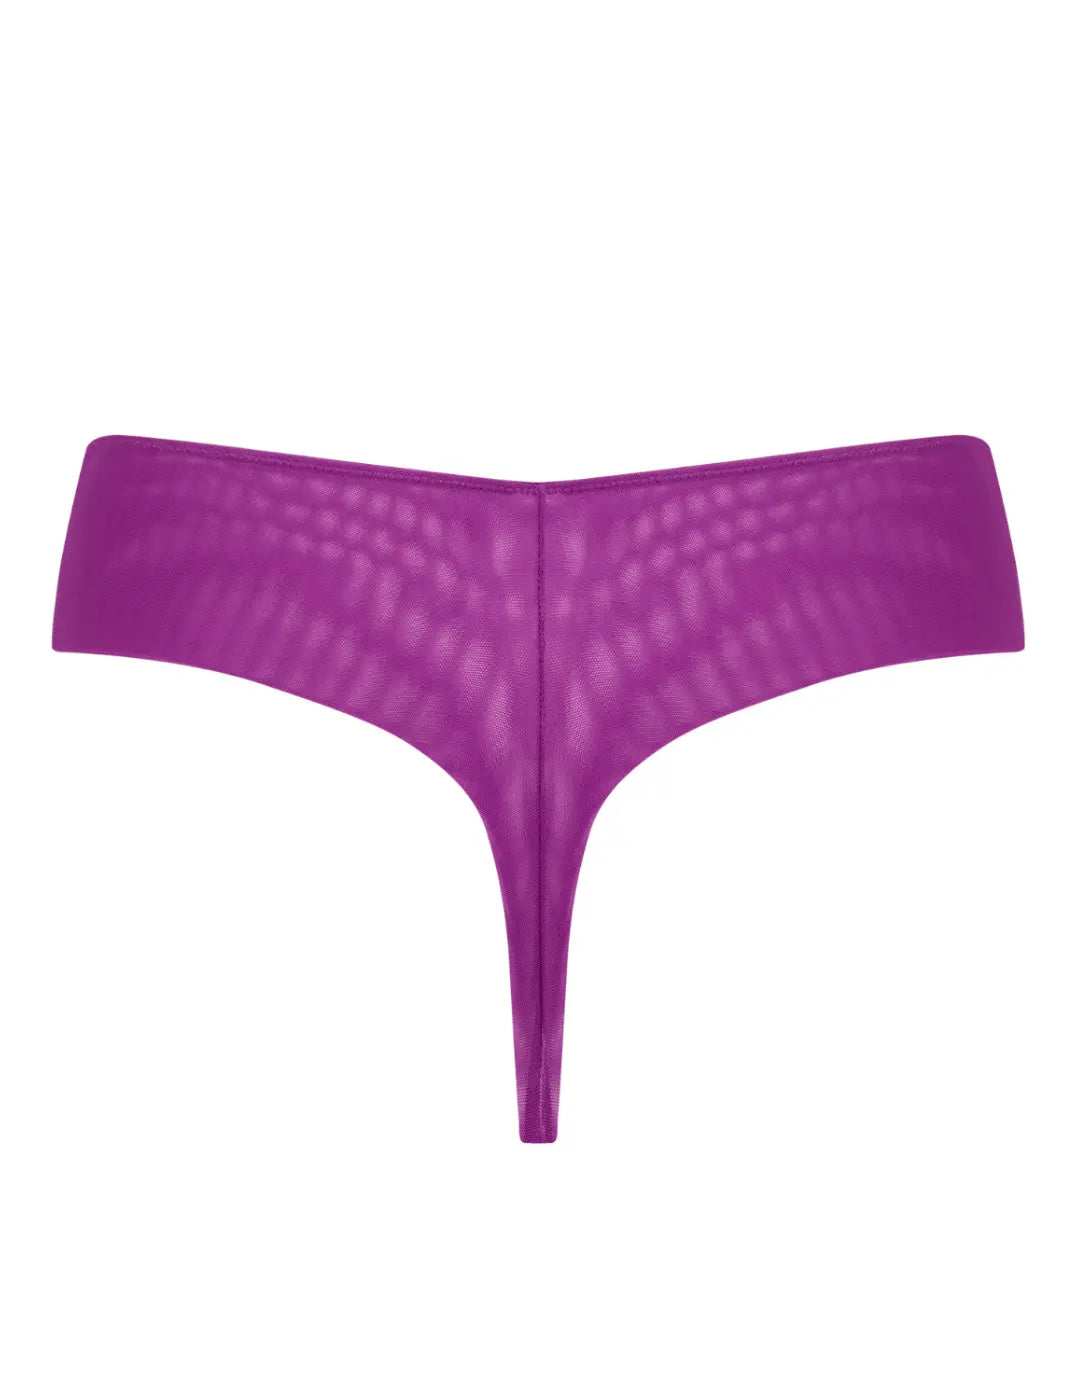 Centre Stage Thong - Purple